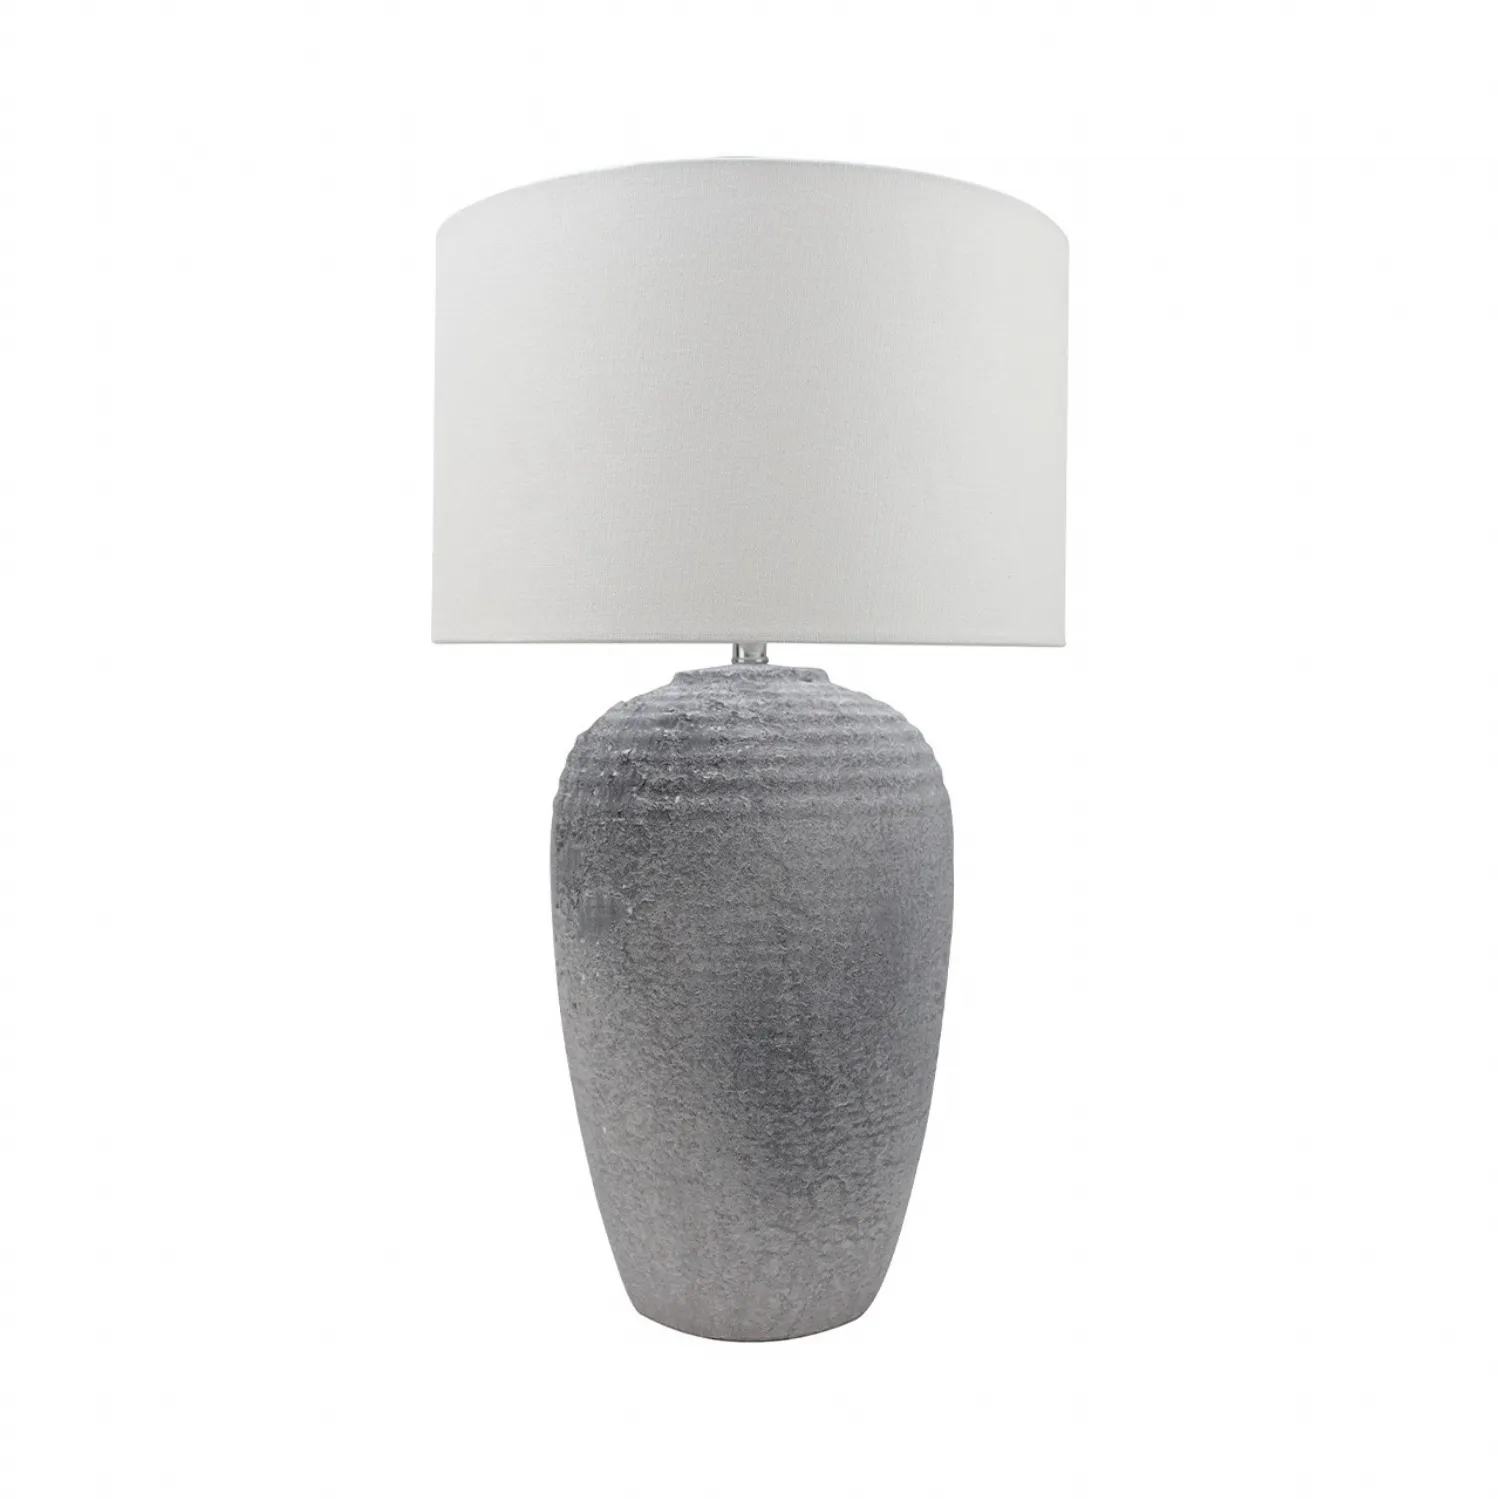 60cm Grey Stone Finish Table Lamp With White Linen Shade